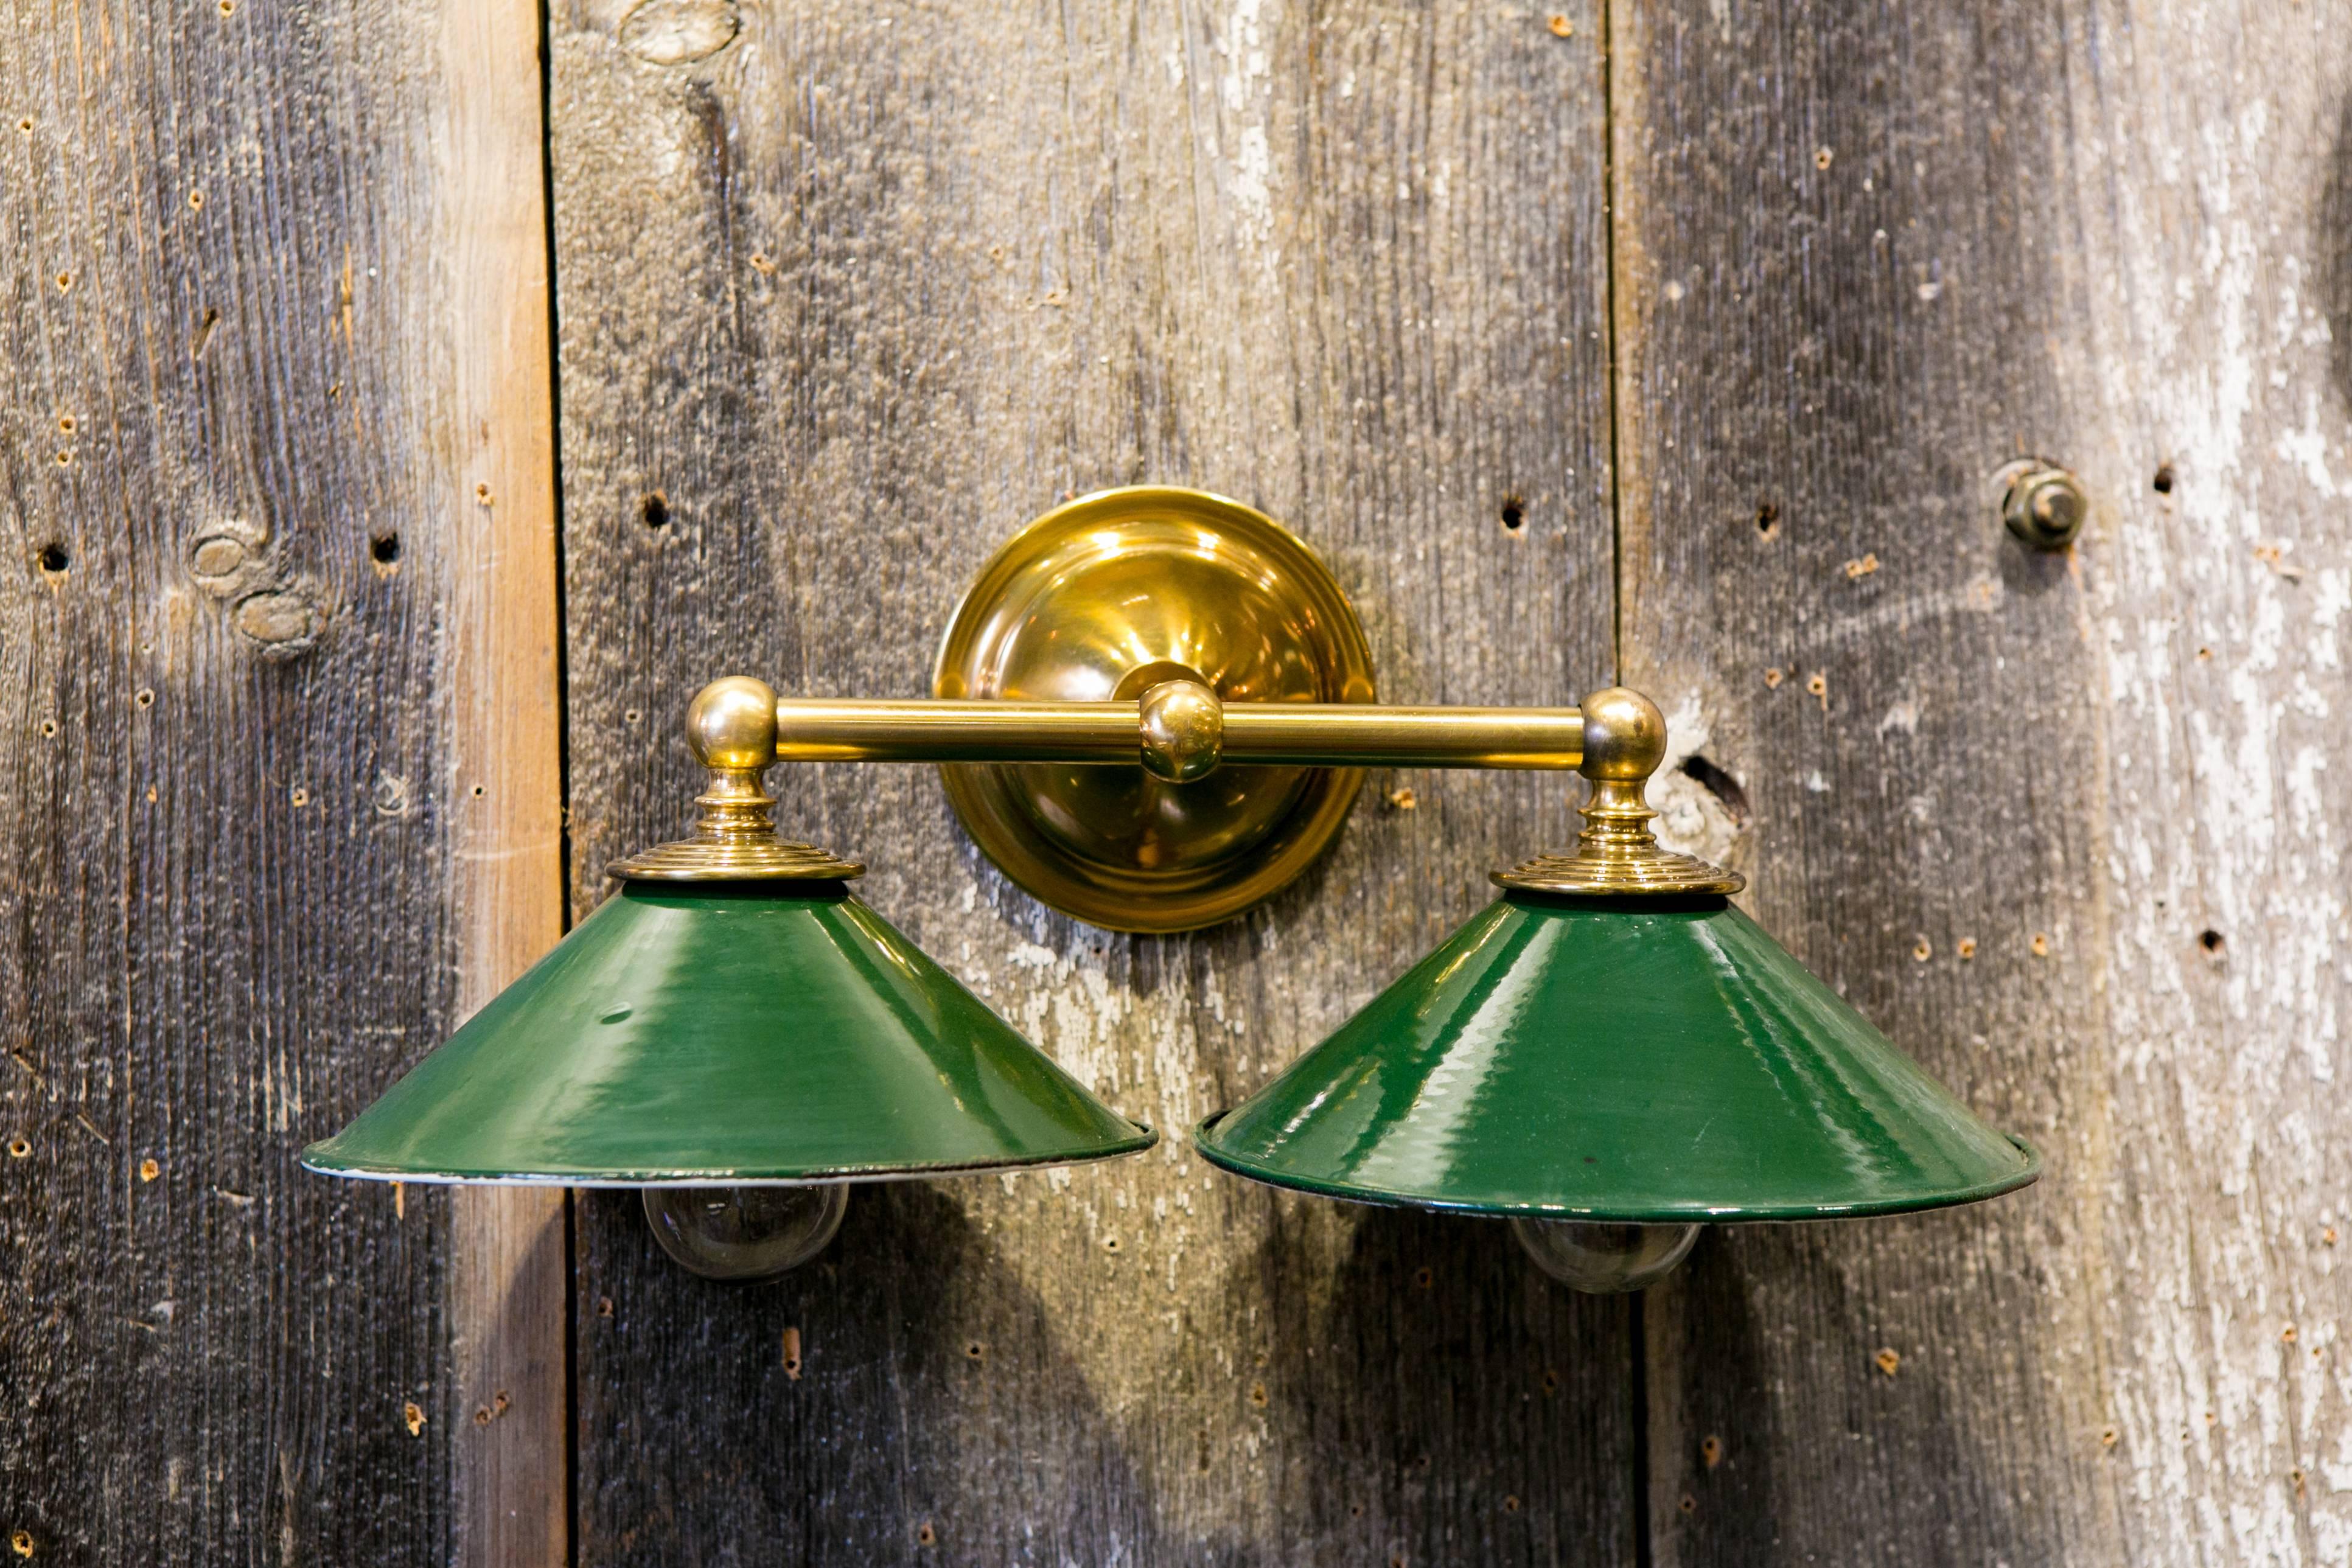 Vintage green enamel shades from Belgium, circa 1920 with white interiors.
Our Exclusive Design pairing vintage shades with a new brass two-light sconce, newly wired with all UL listed parts. Five available, price is for one sconce. Great for over a